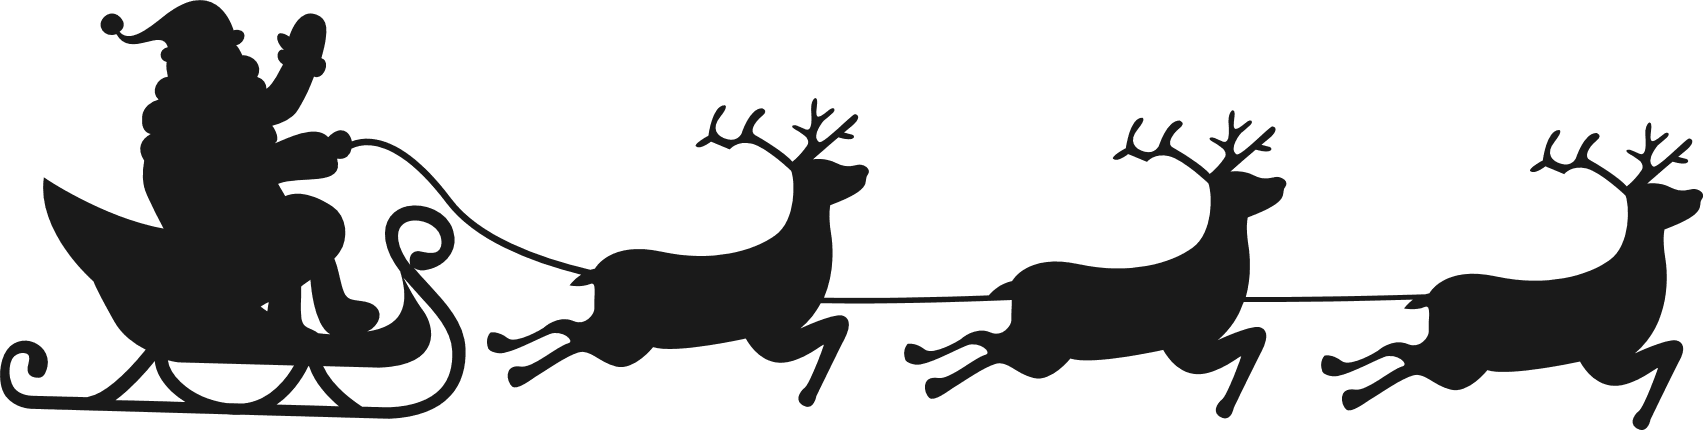 Santa Claus And Reindeers Sleigh Silhouette Christmas Free Svg File Svg Heart